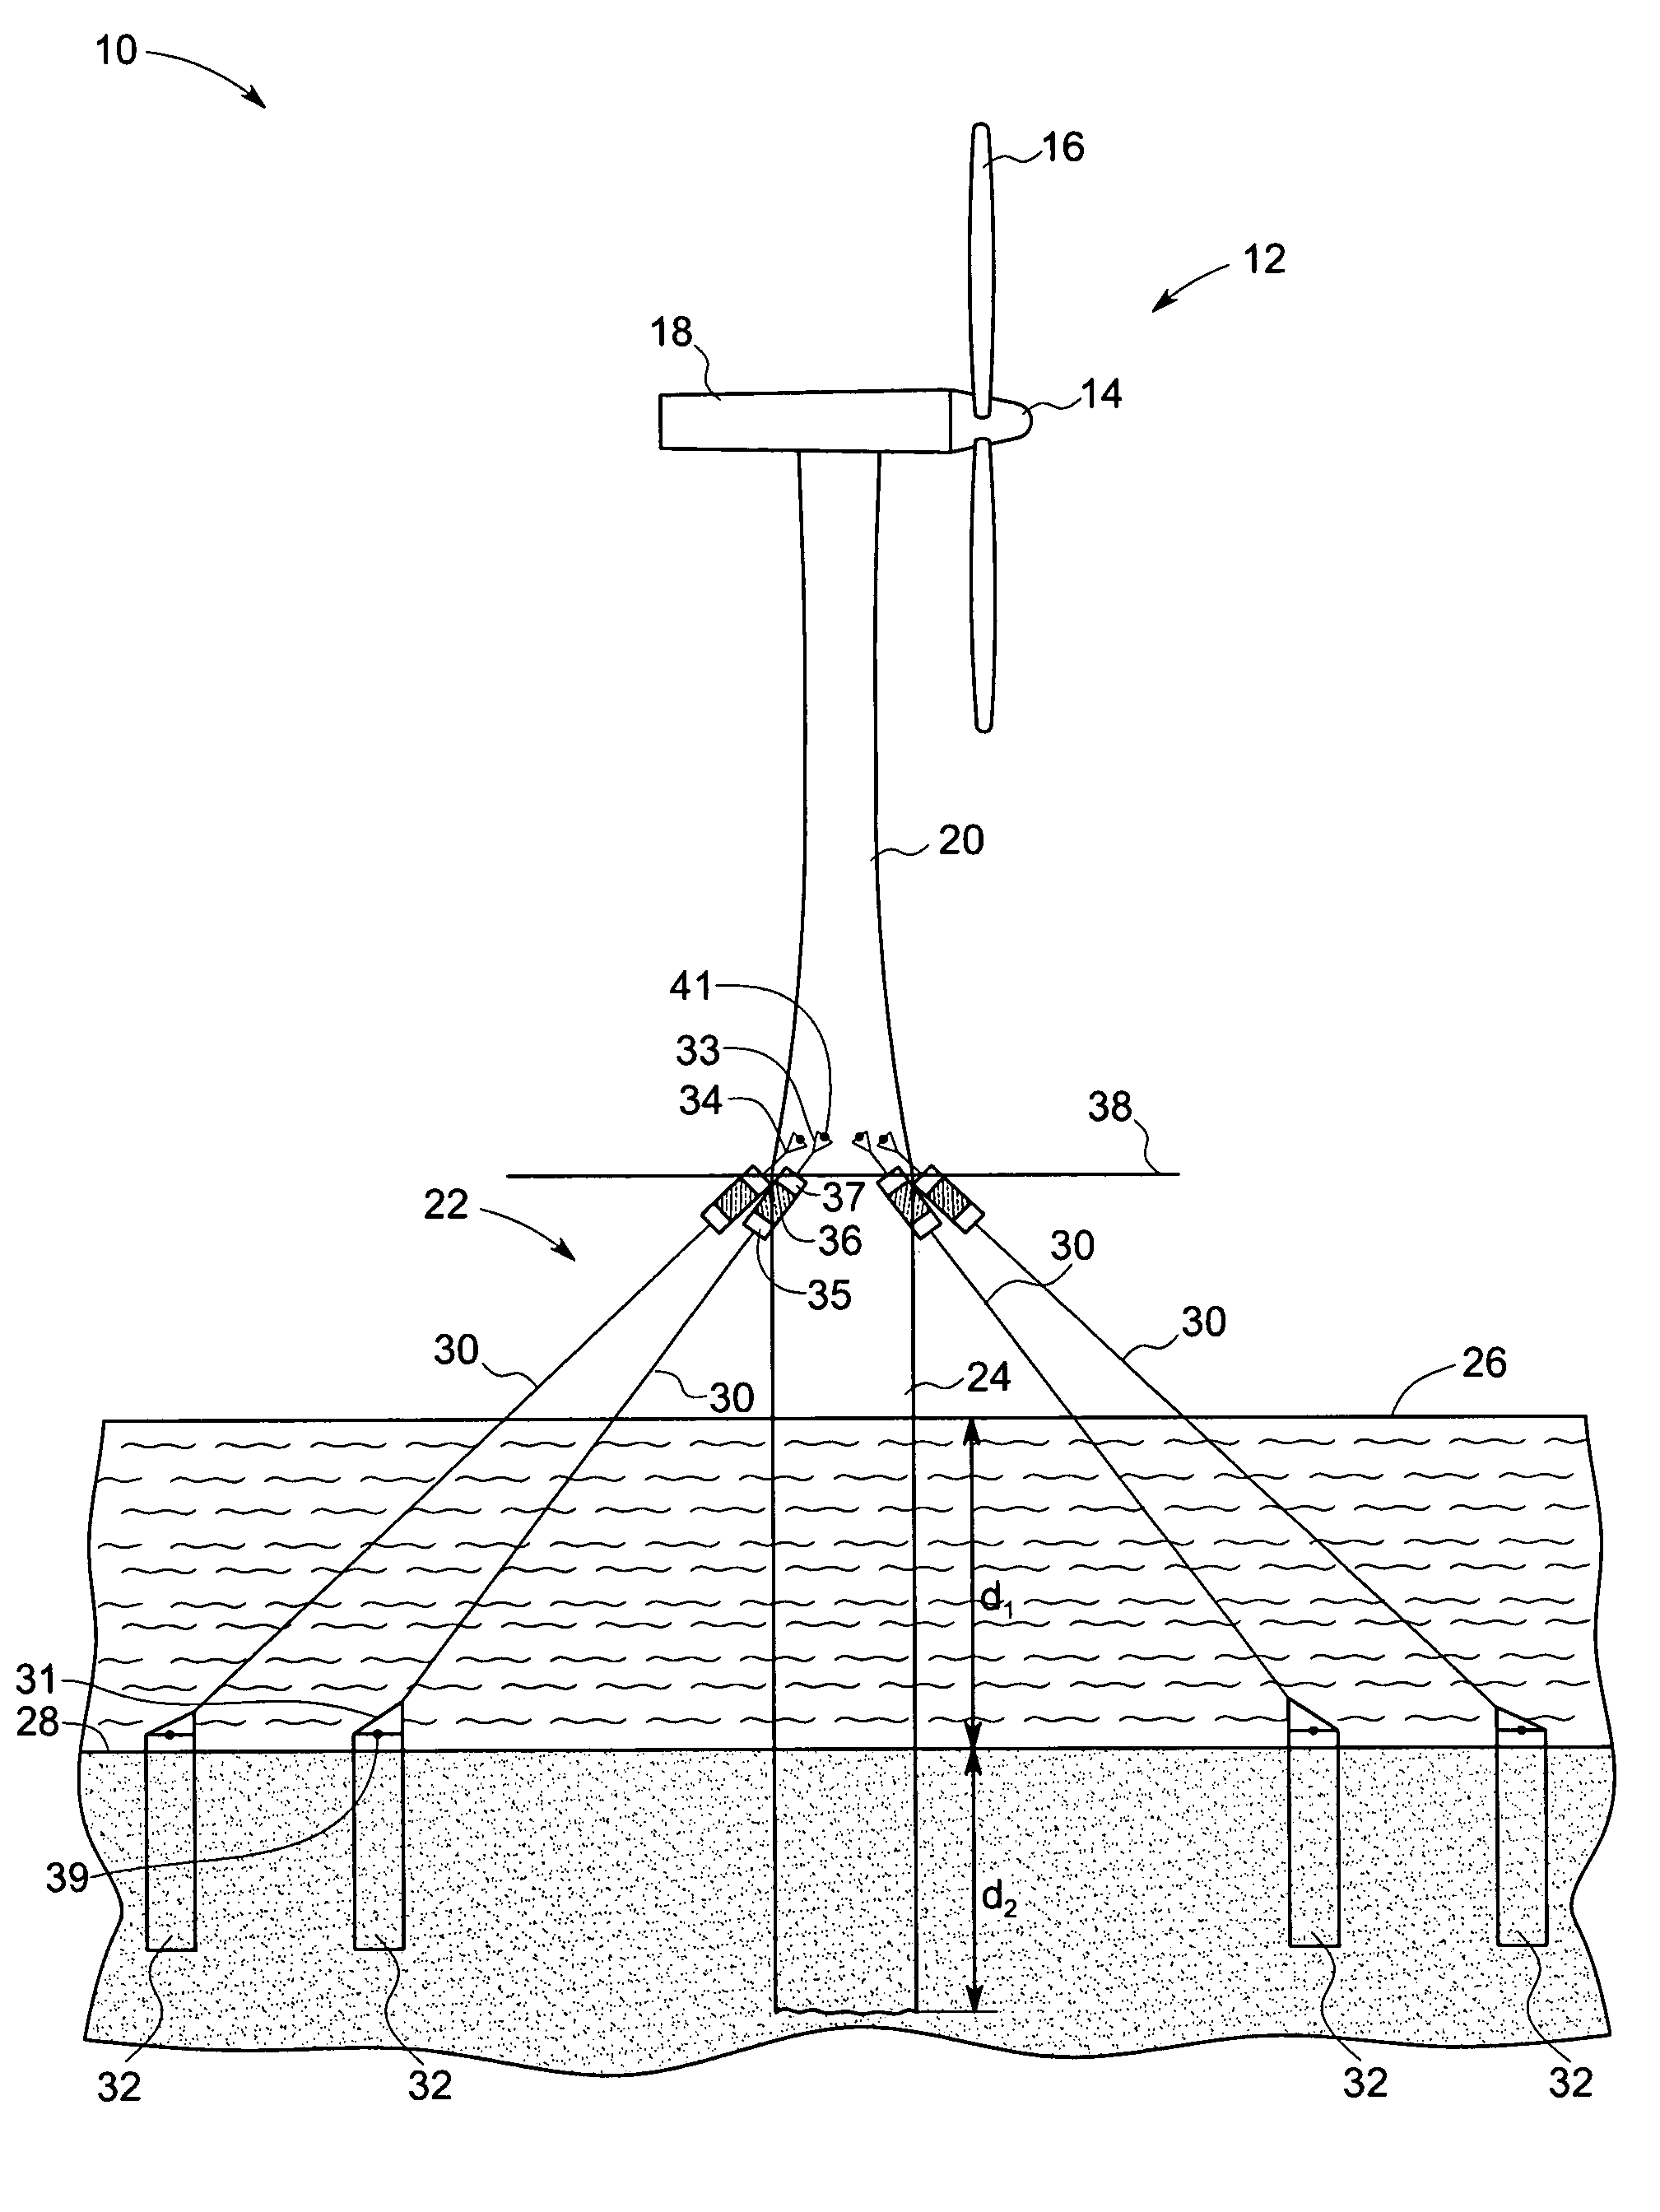 System and method for installing a wind turbine at an offshore location